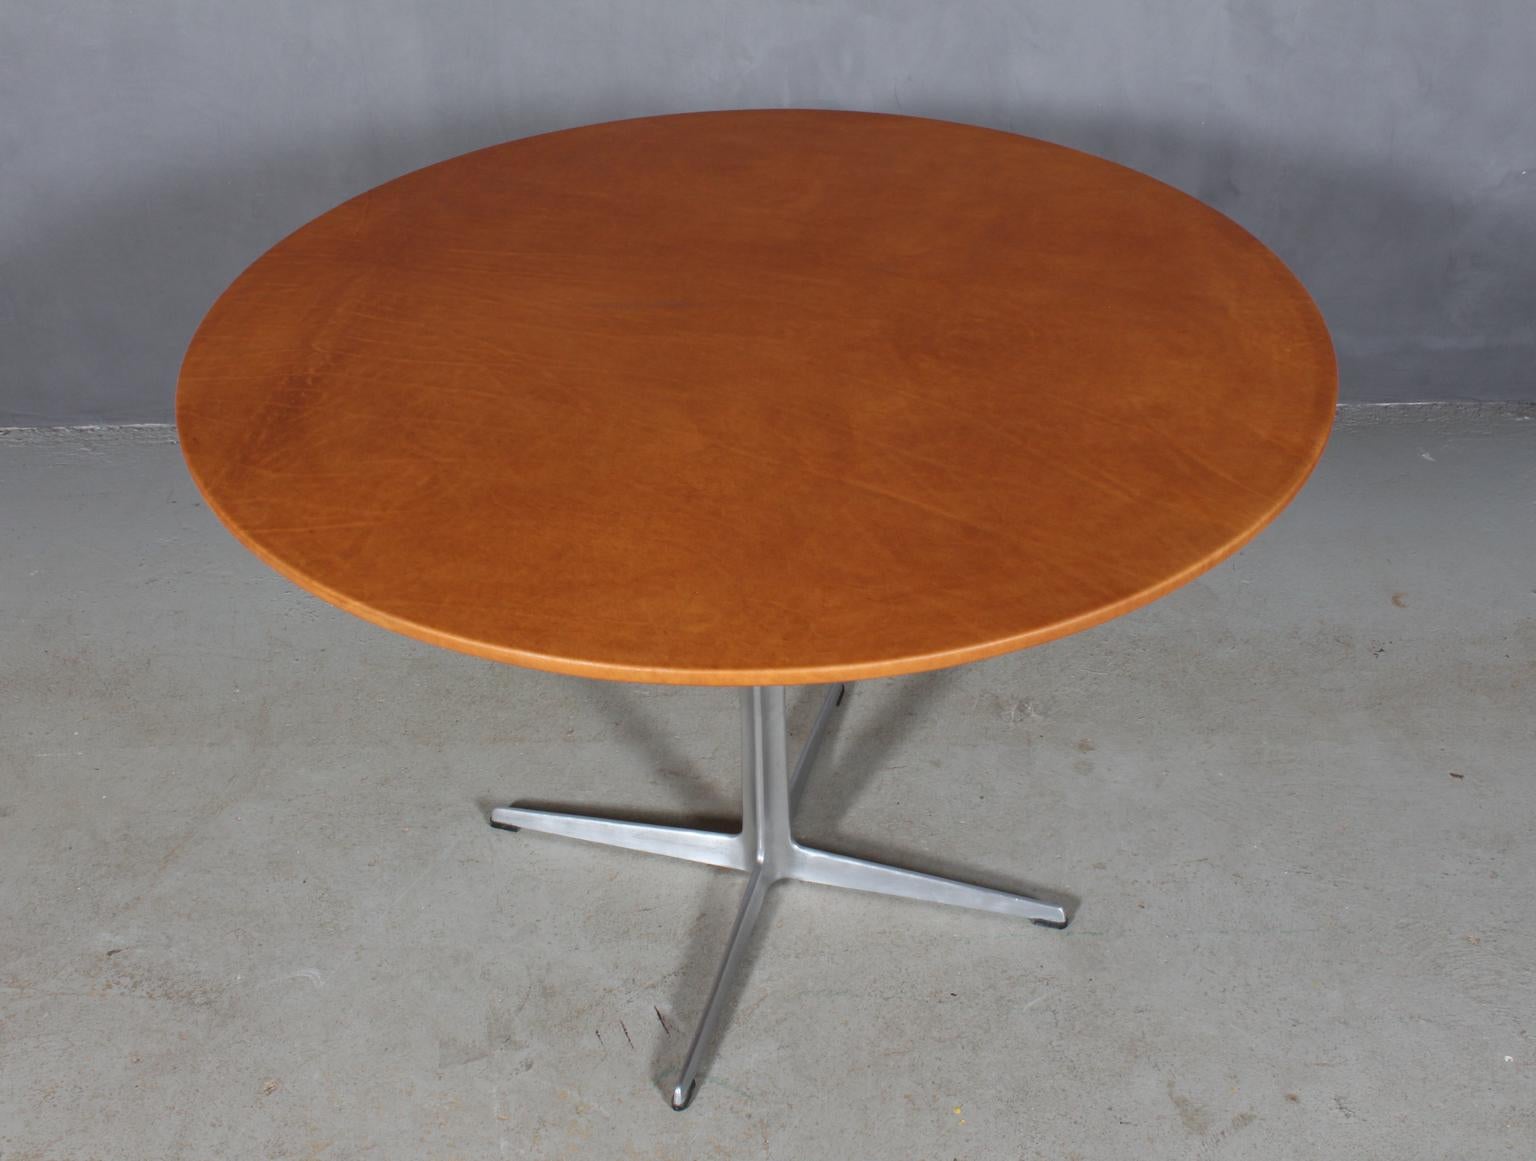 Arne Jacobsen round dining table with new upholstered plate with cognac Vintage aniline leather.

Four star profilated foot of aluminium.

Model 3513, made by Fritz Hansen.

The leather upholstery gives a unique and strong surface which will